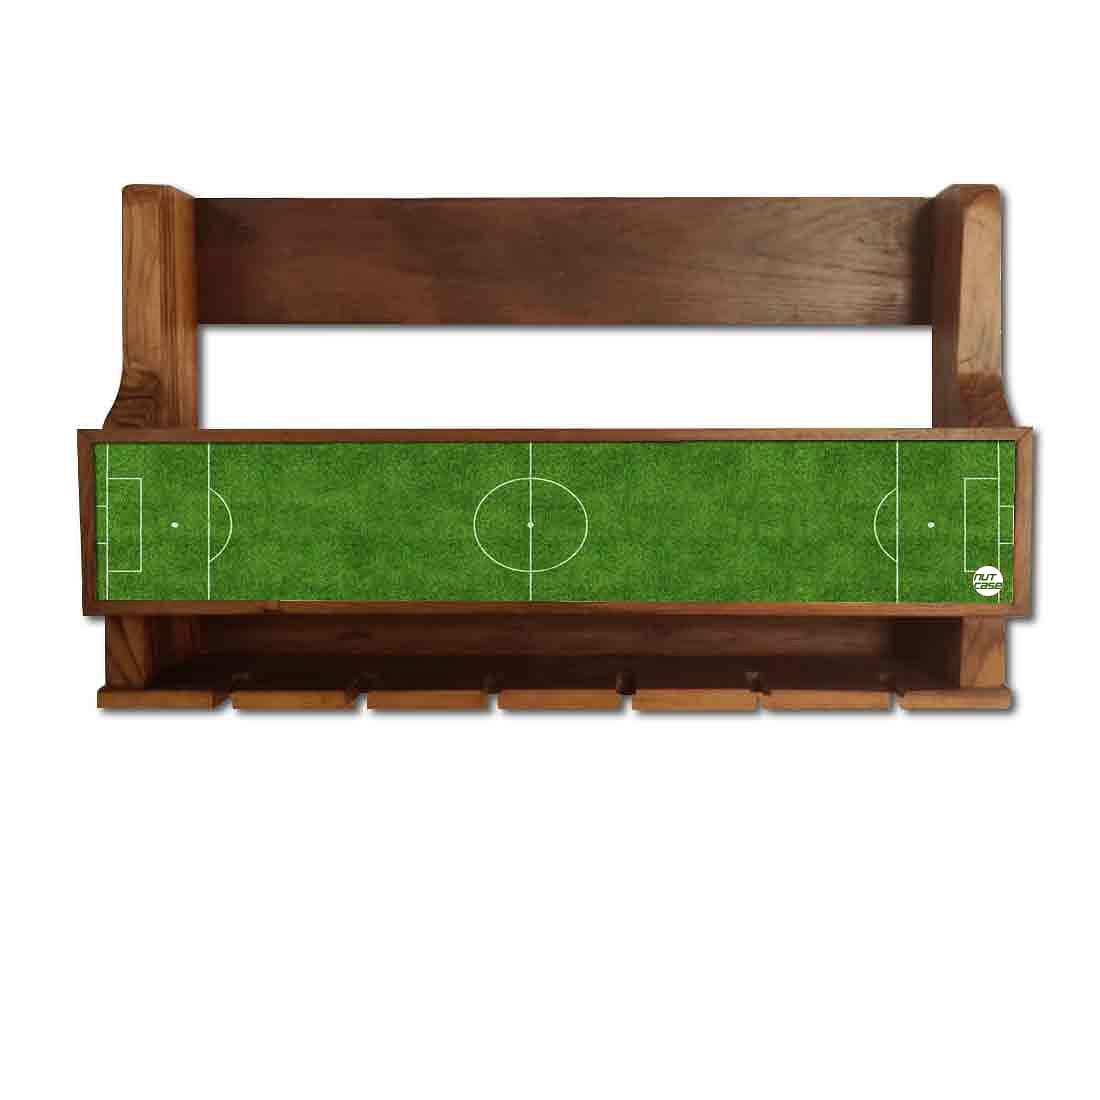 Wine Rack Wall Cabinet Wooden for Living Room - Stores 5 Bottles 6 Glasses - Football Pitch Nutcase